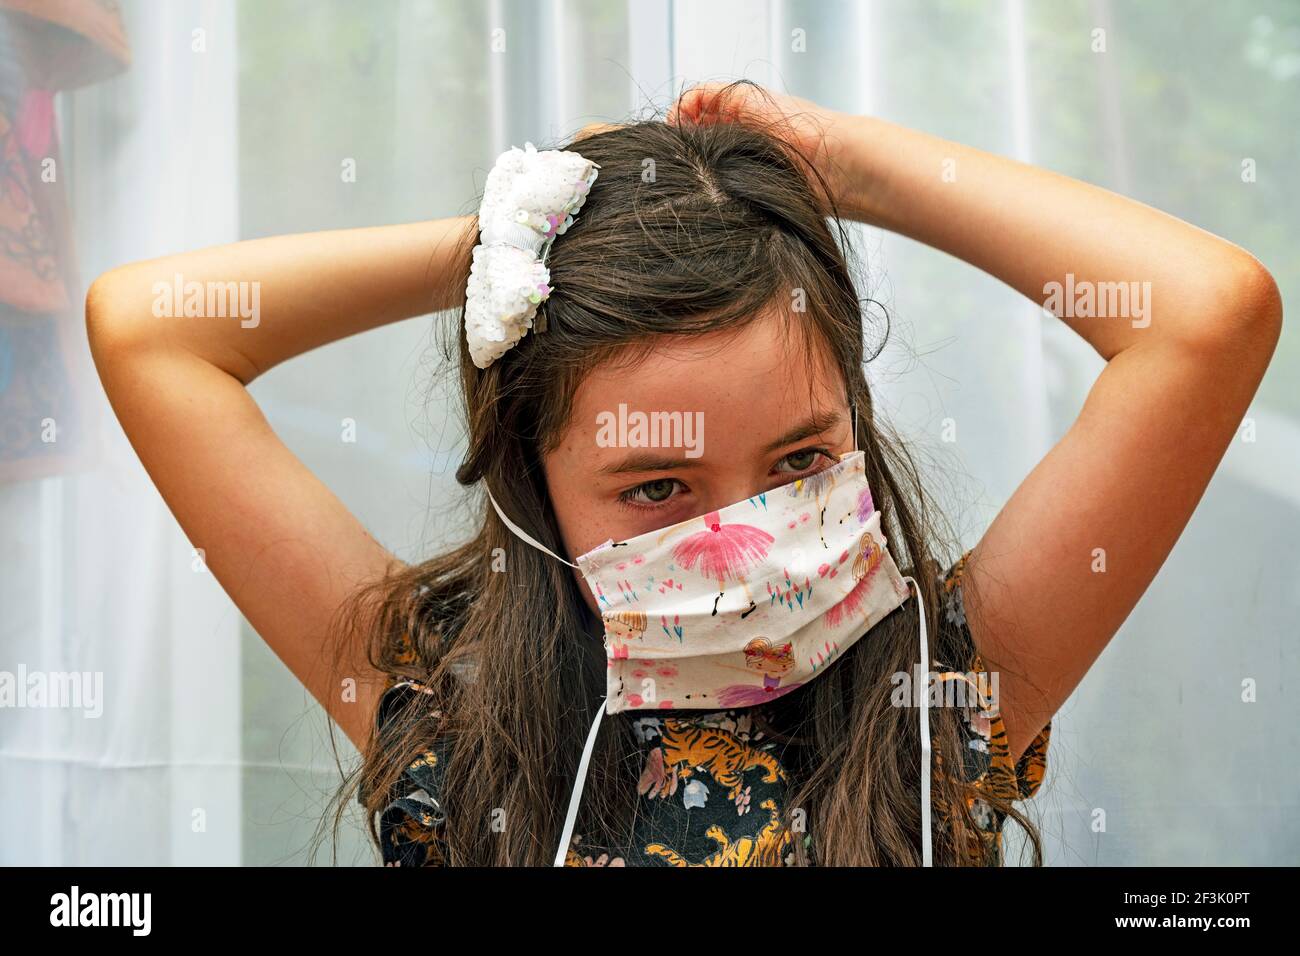 Young girl fitting homemade facemask Stock Photo